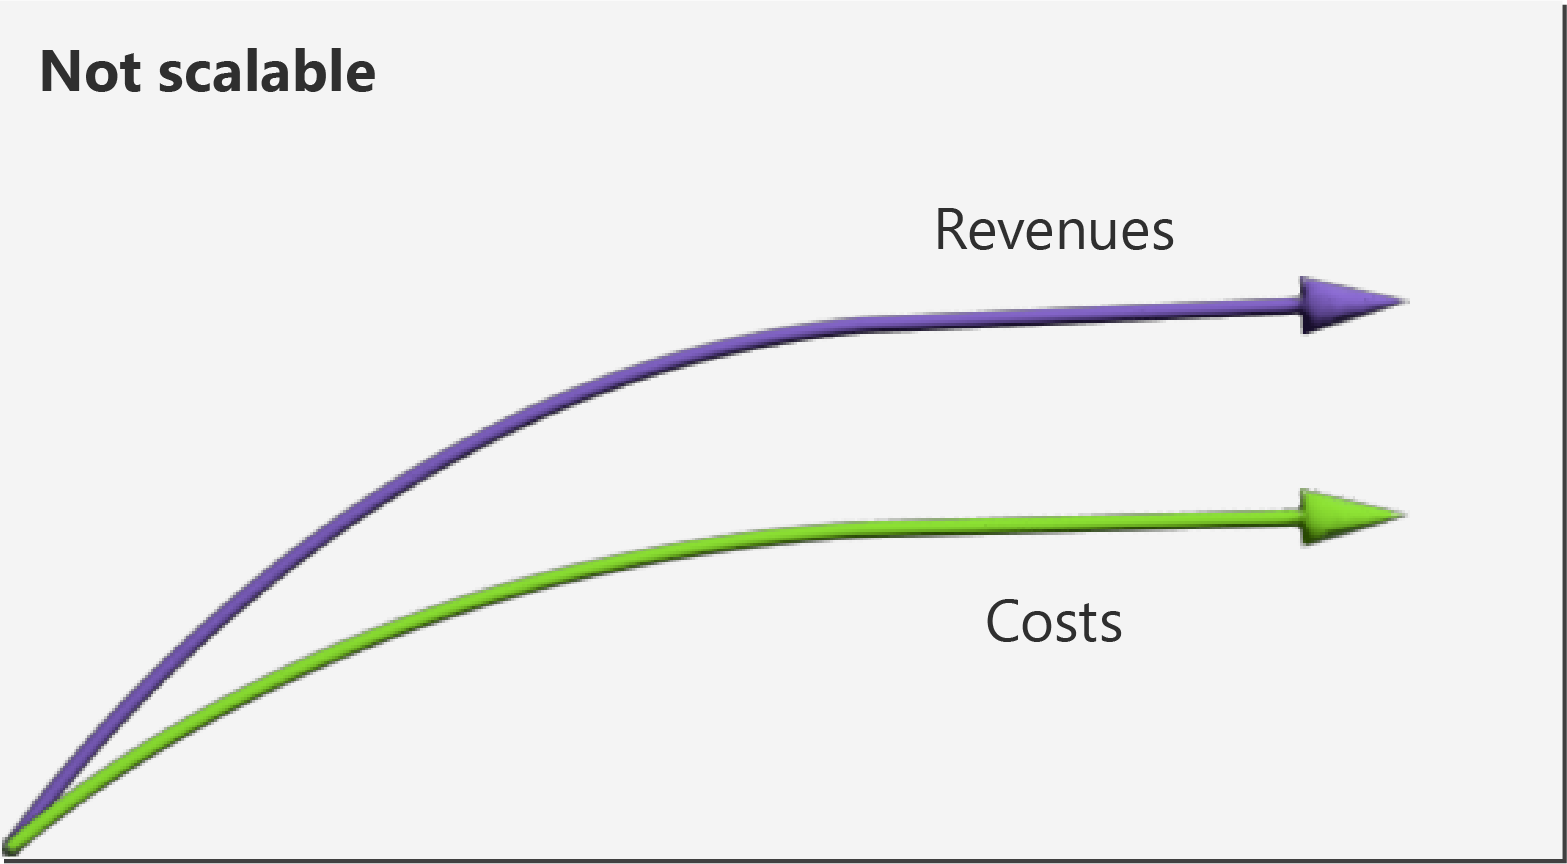 Line chart that shows revenues exceeding costs when both reach a plateau.